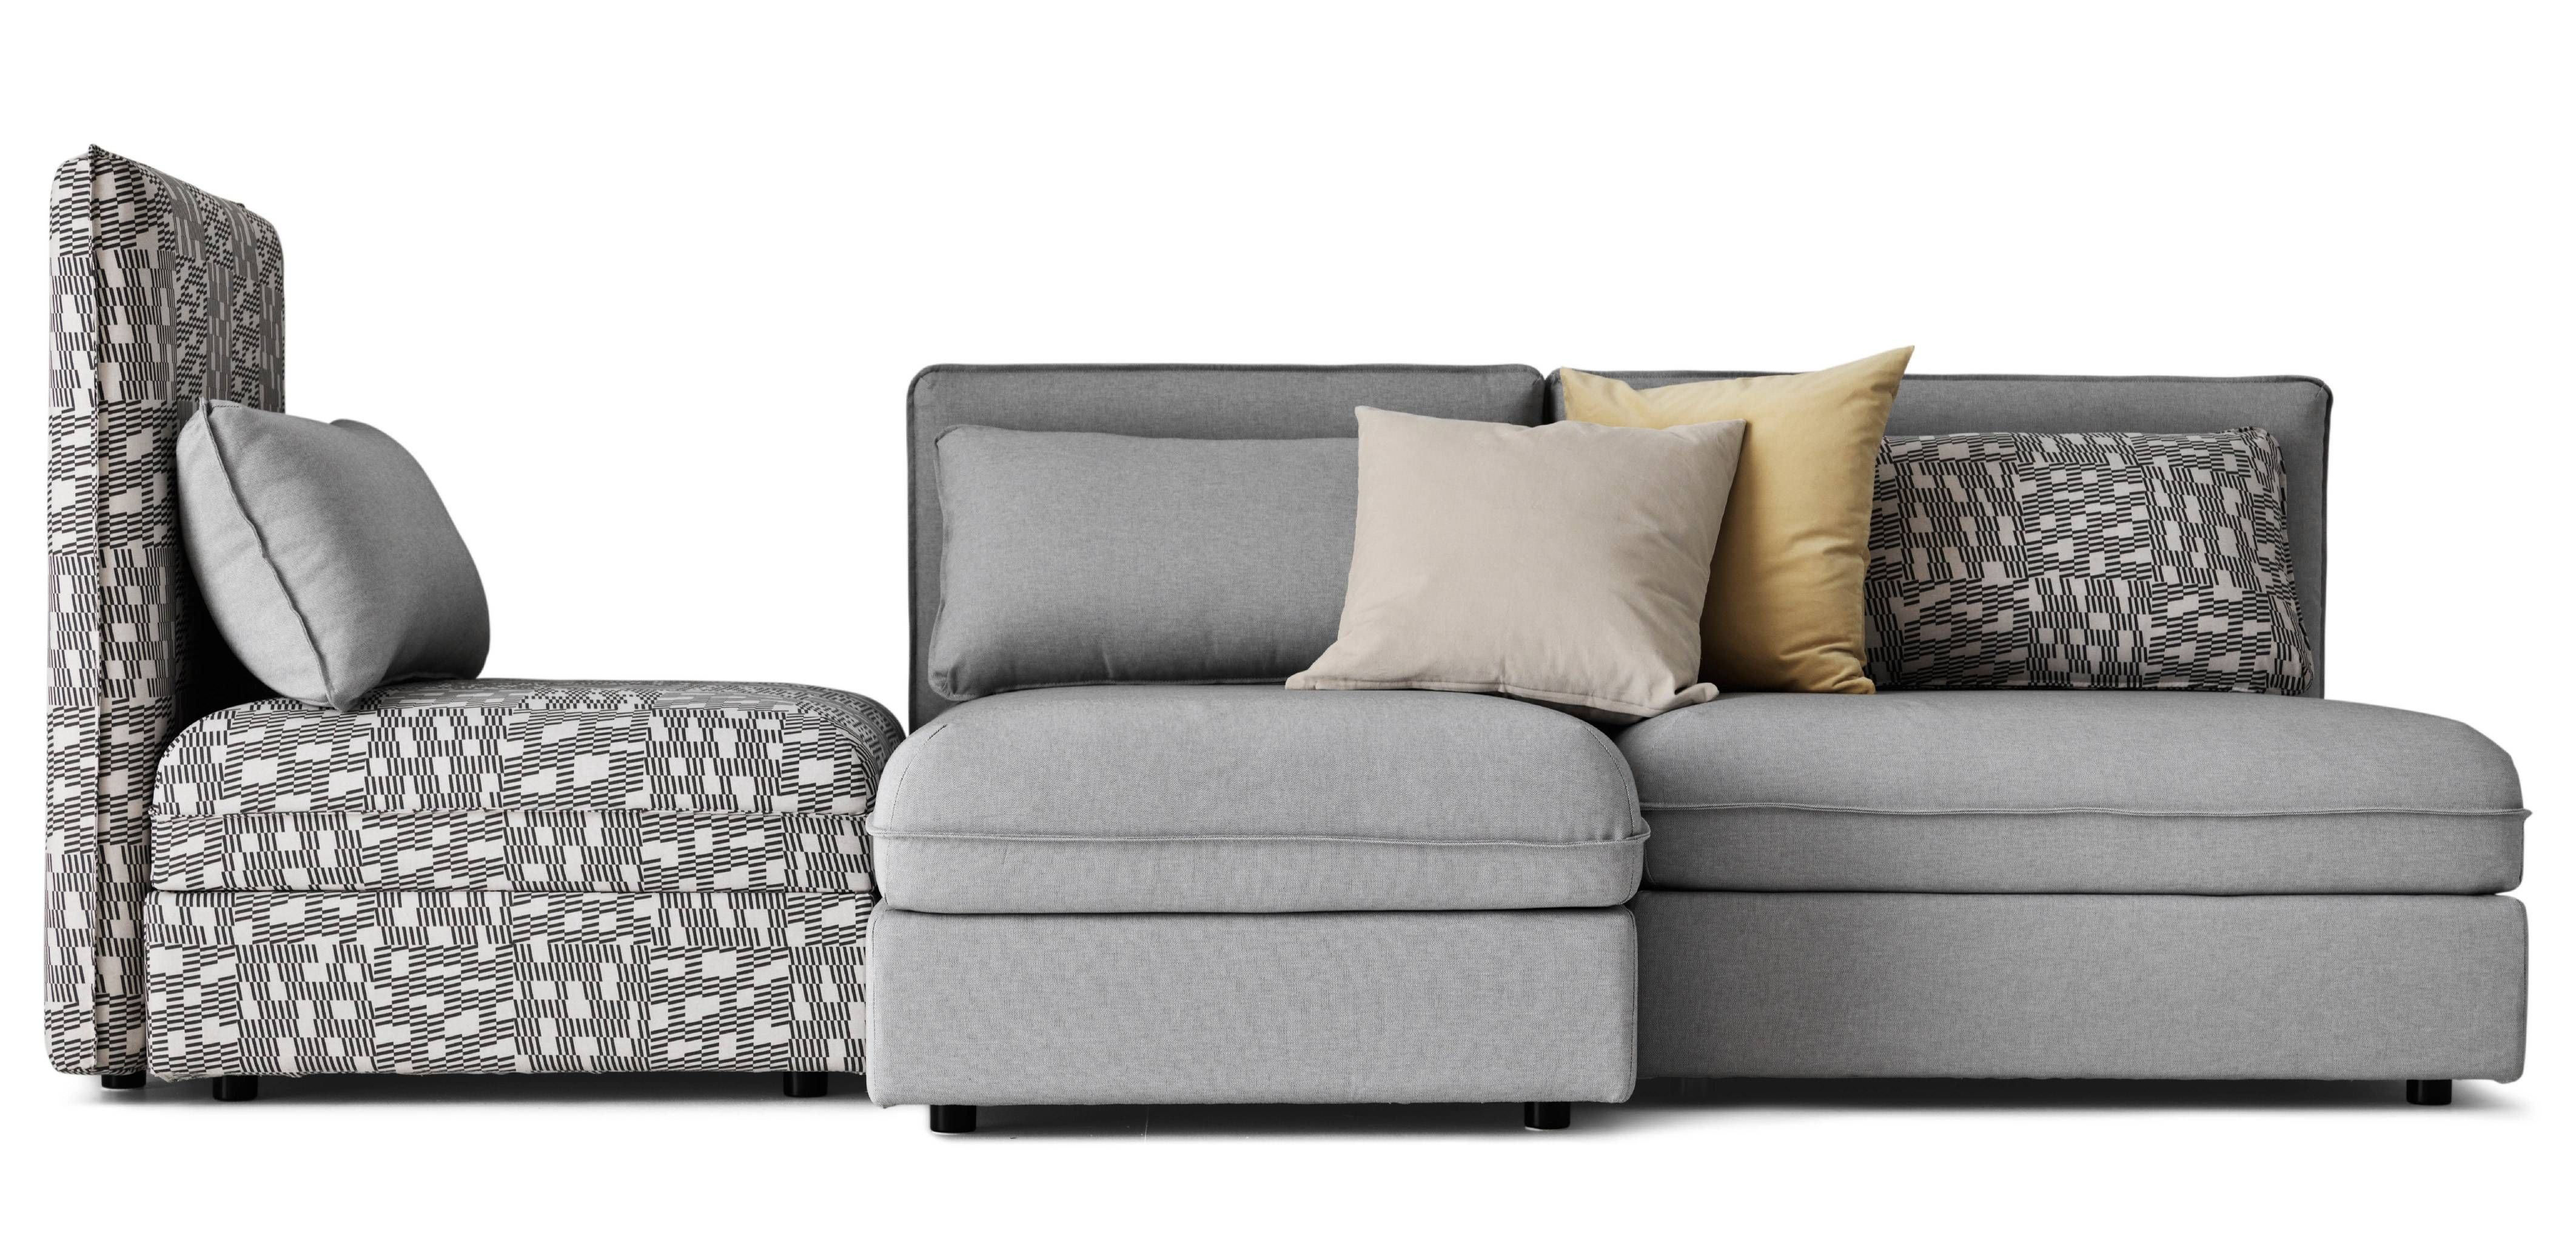 Modular & Sectional Sofas | Ikea Ireland Intended For Modular Sofas (View 6 of 15)